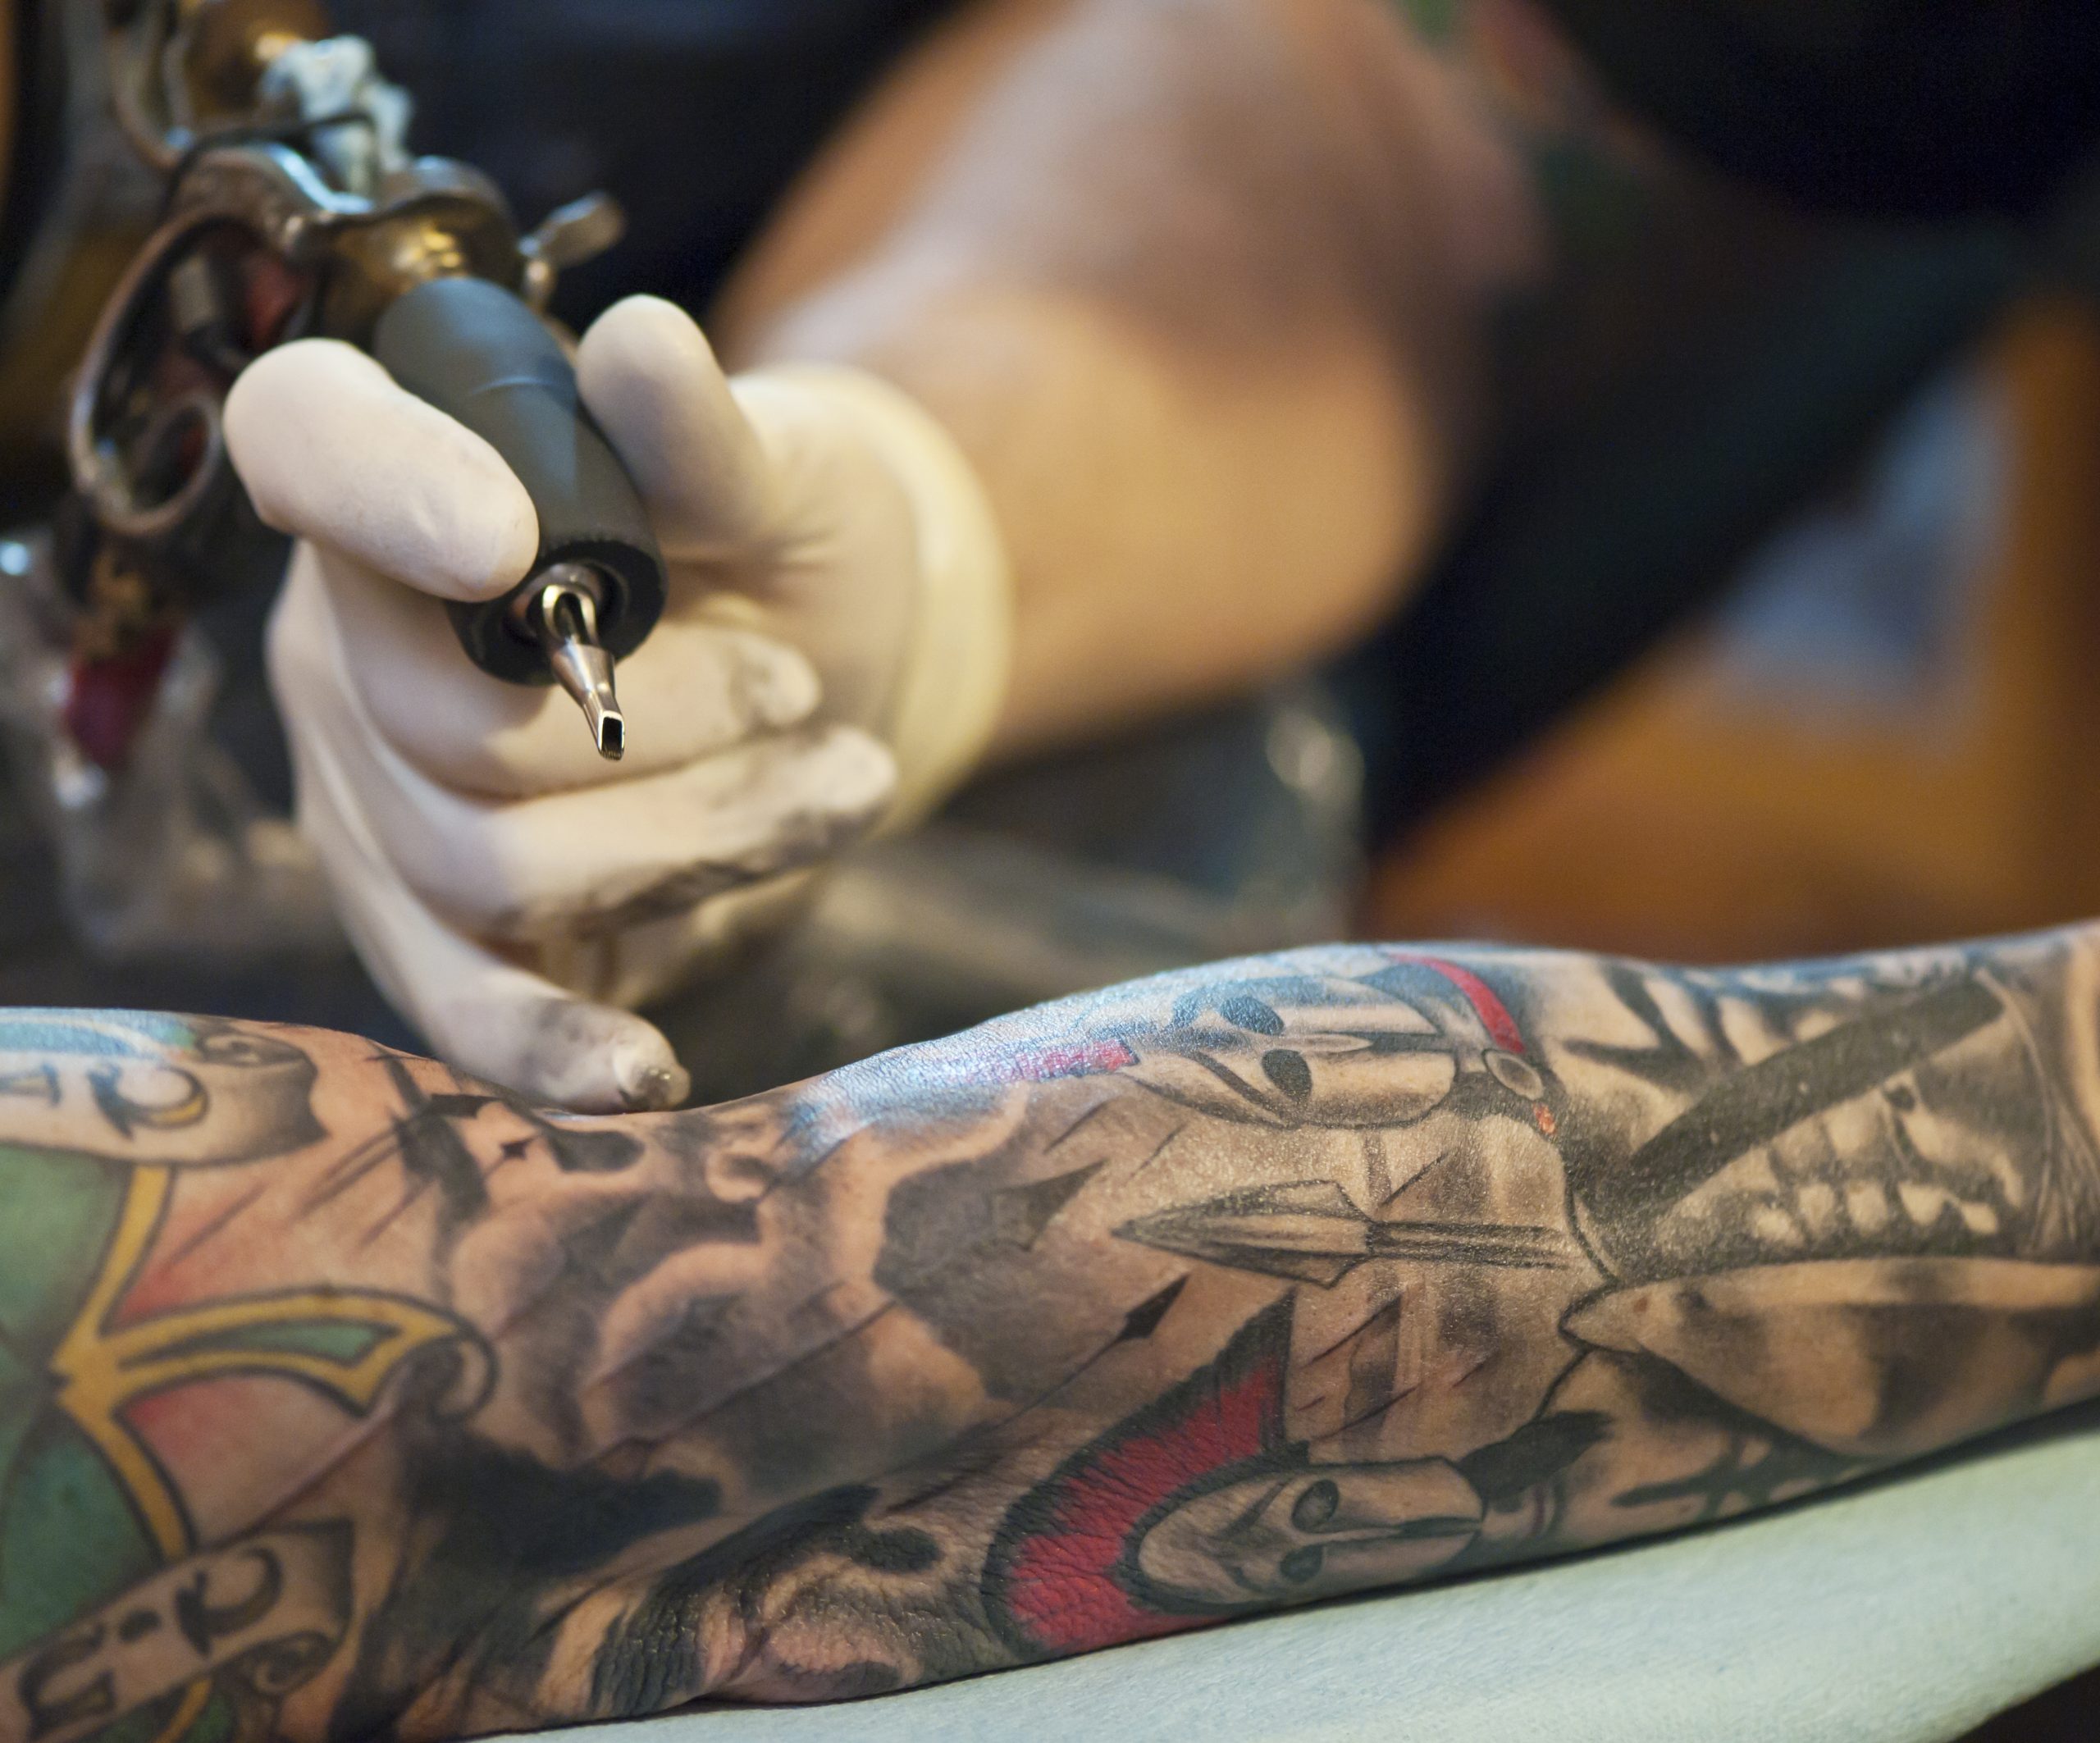 New Study Finds Potentially Toxic Cancer-Causing Chemicals in Tattoo Ink